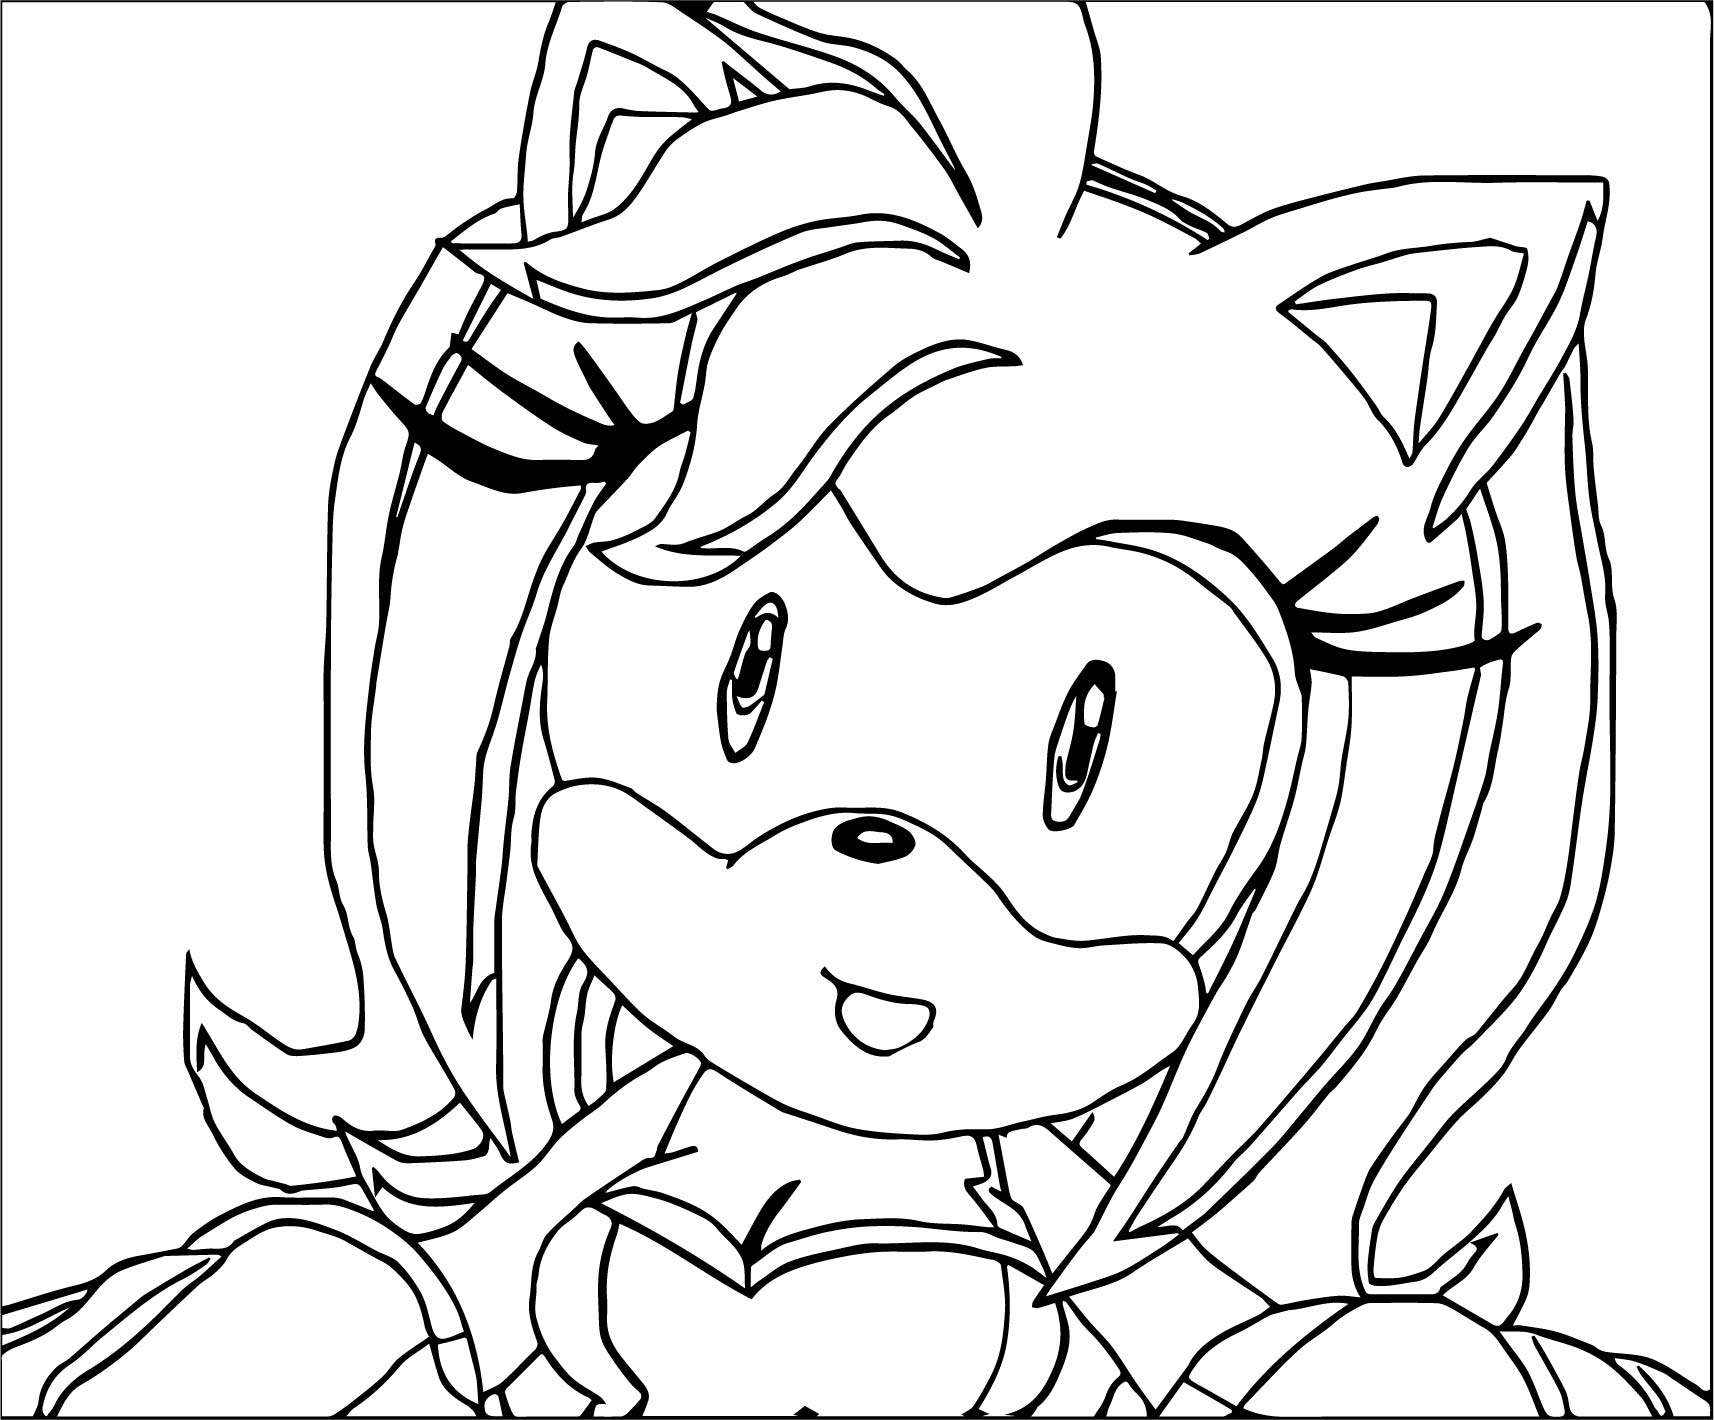 Be Suprised Amy Rose Coloring Page | Wecoloringpage destiné Coloriage Amy Rose